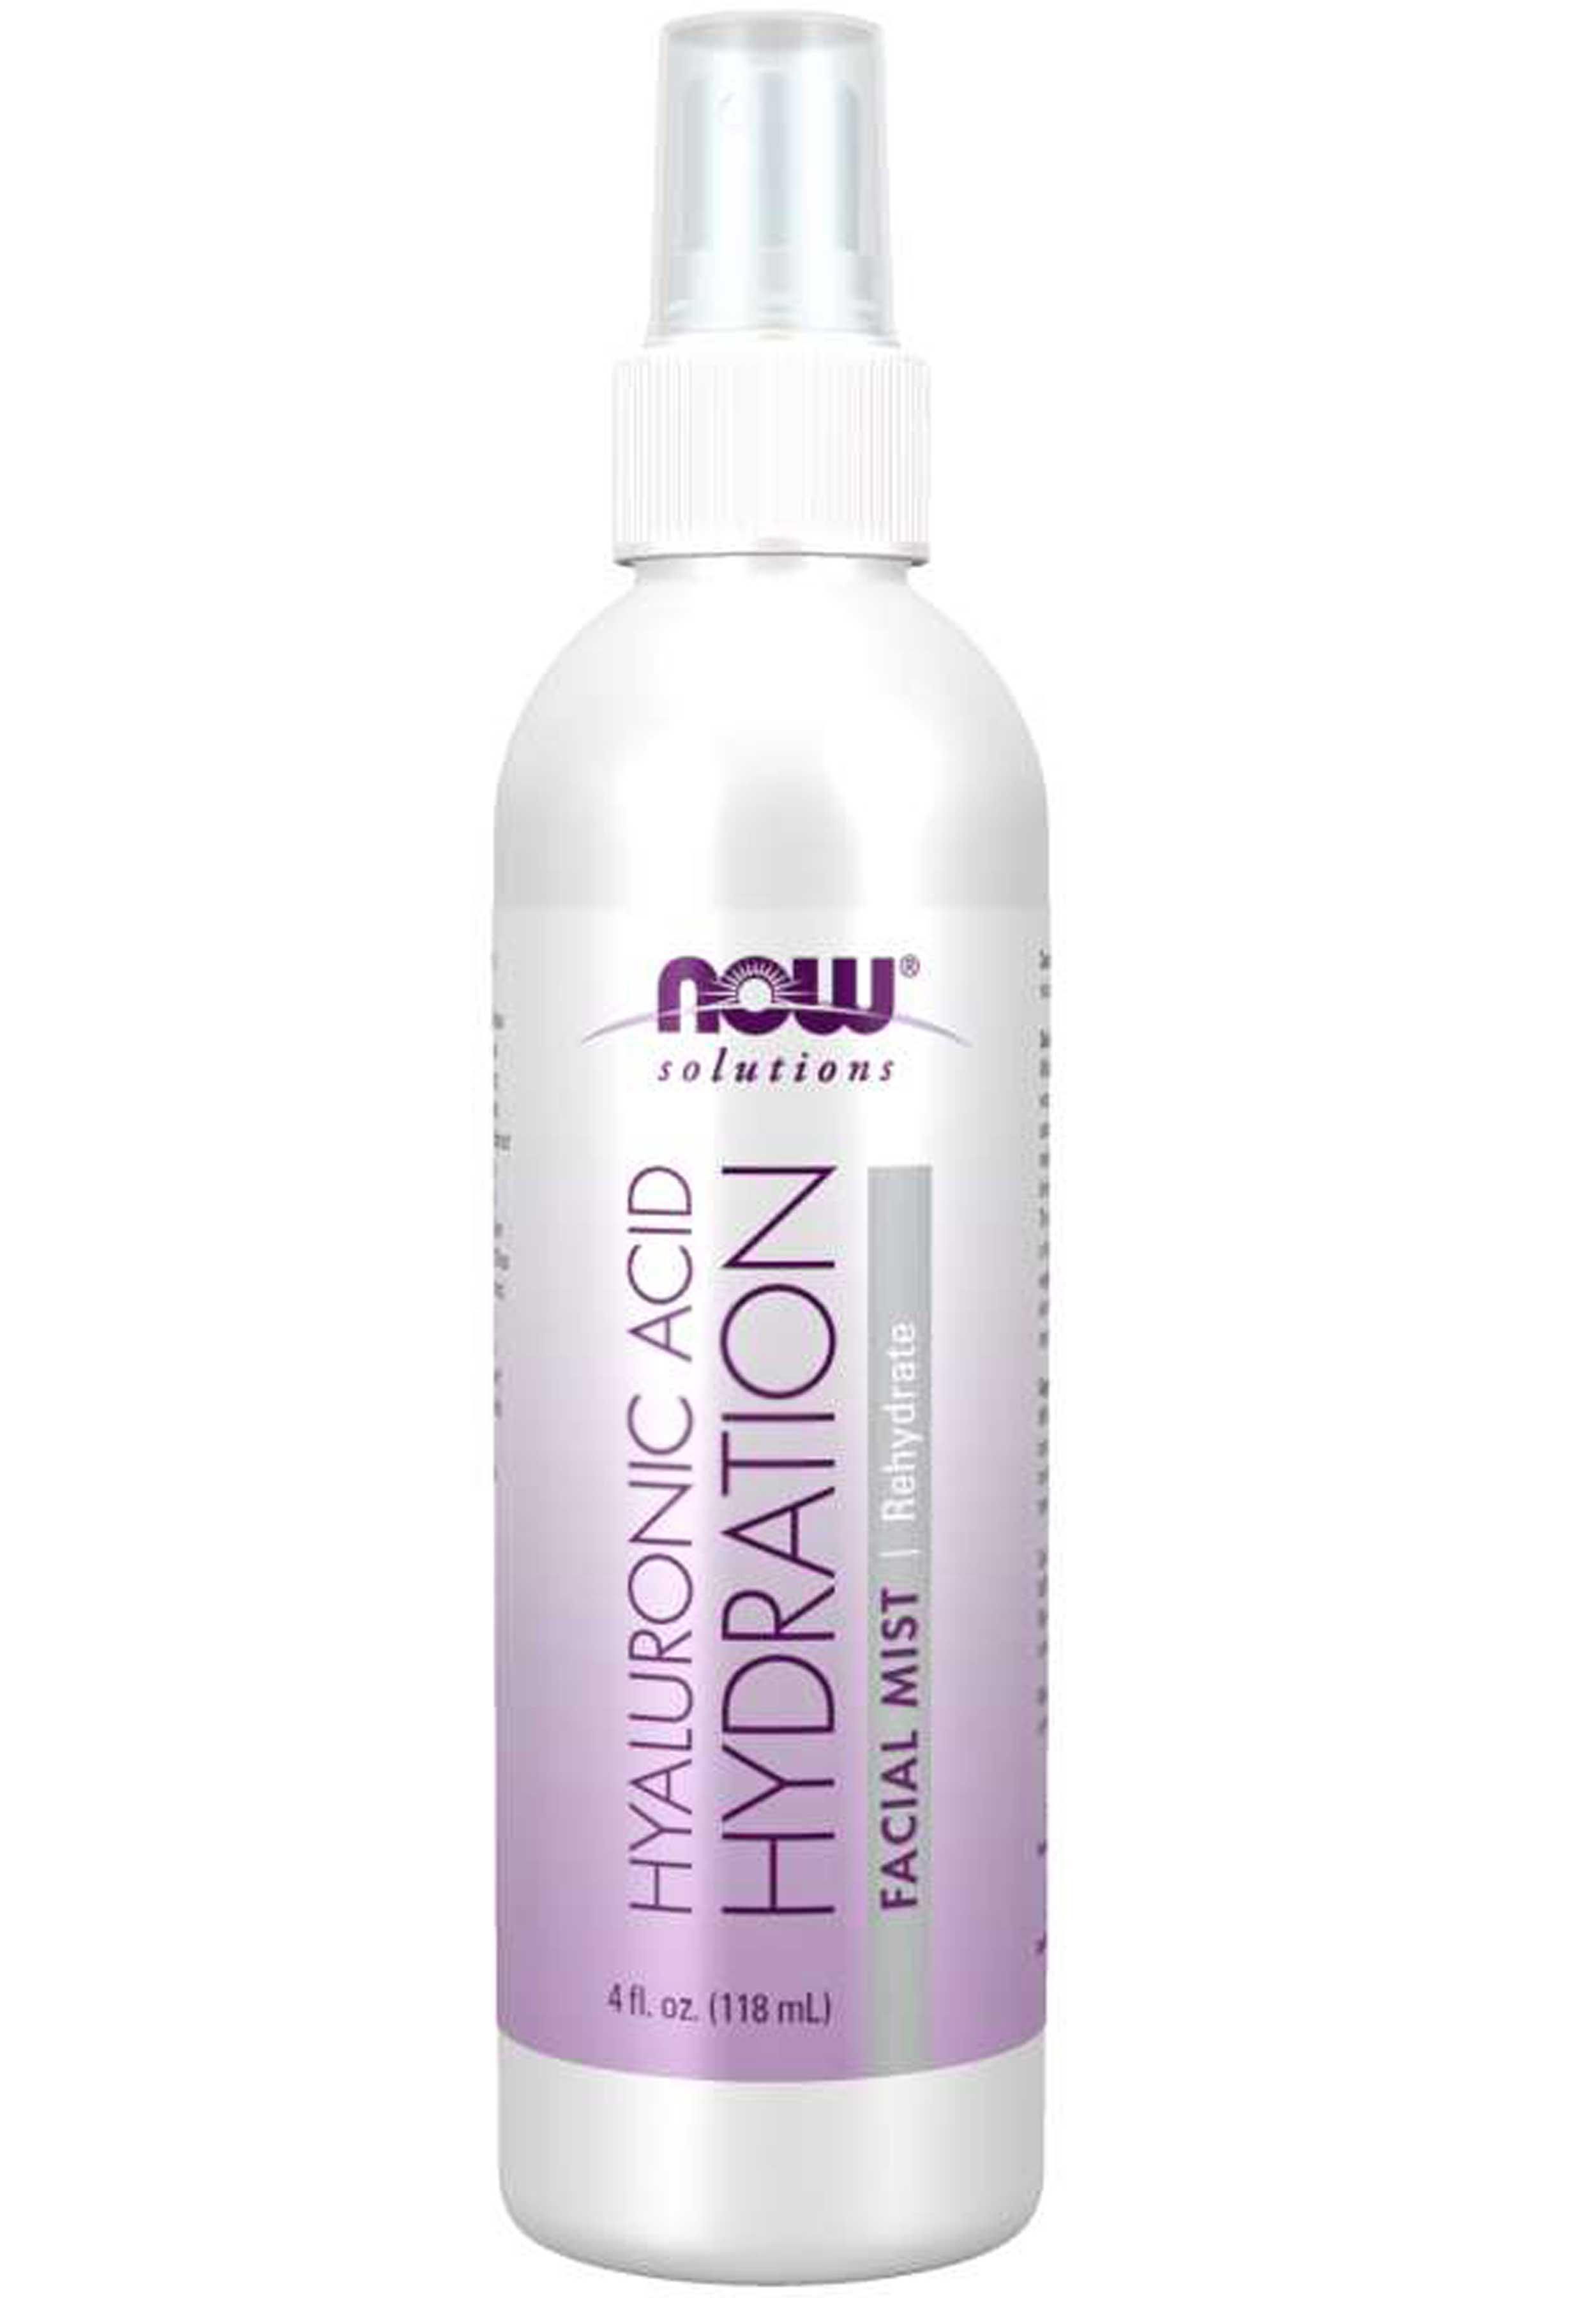 NOW Solutions Hyaluronic Acid Hydration Facial Mist